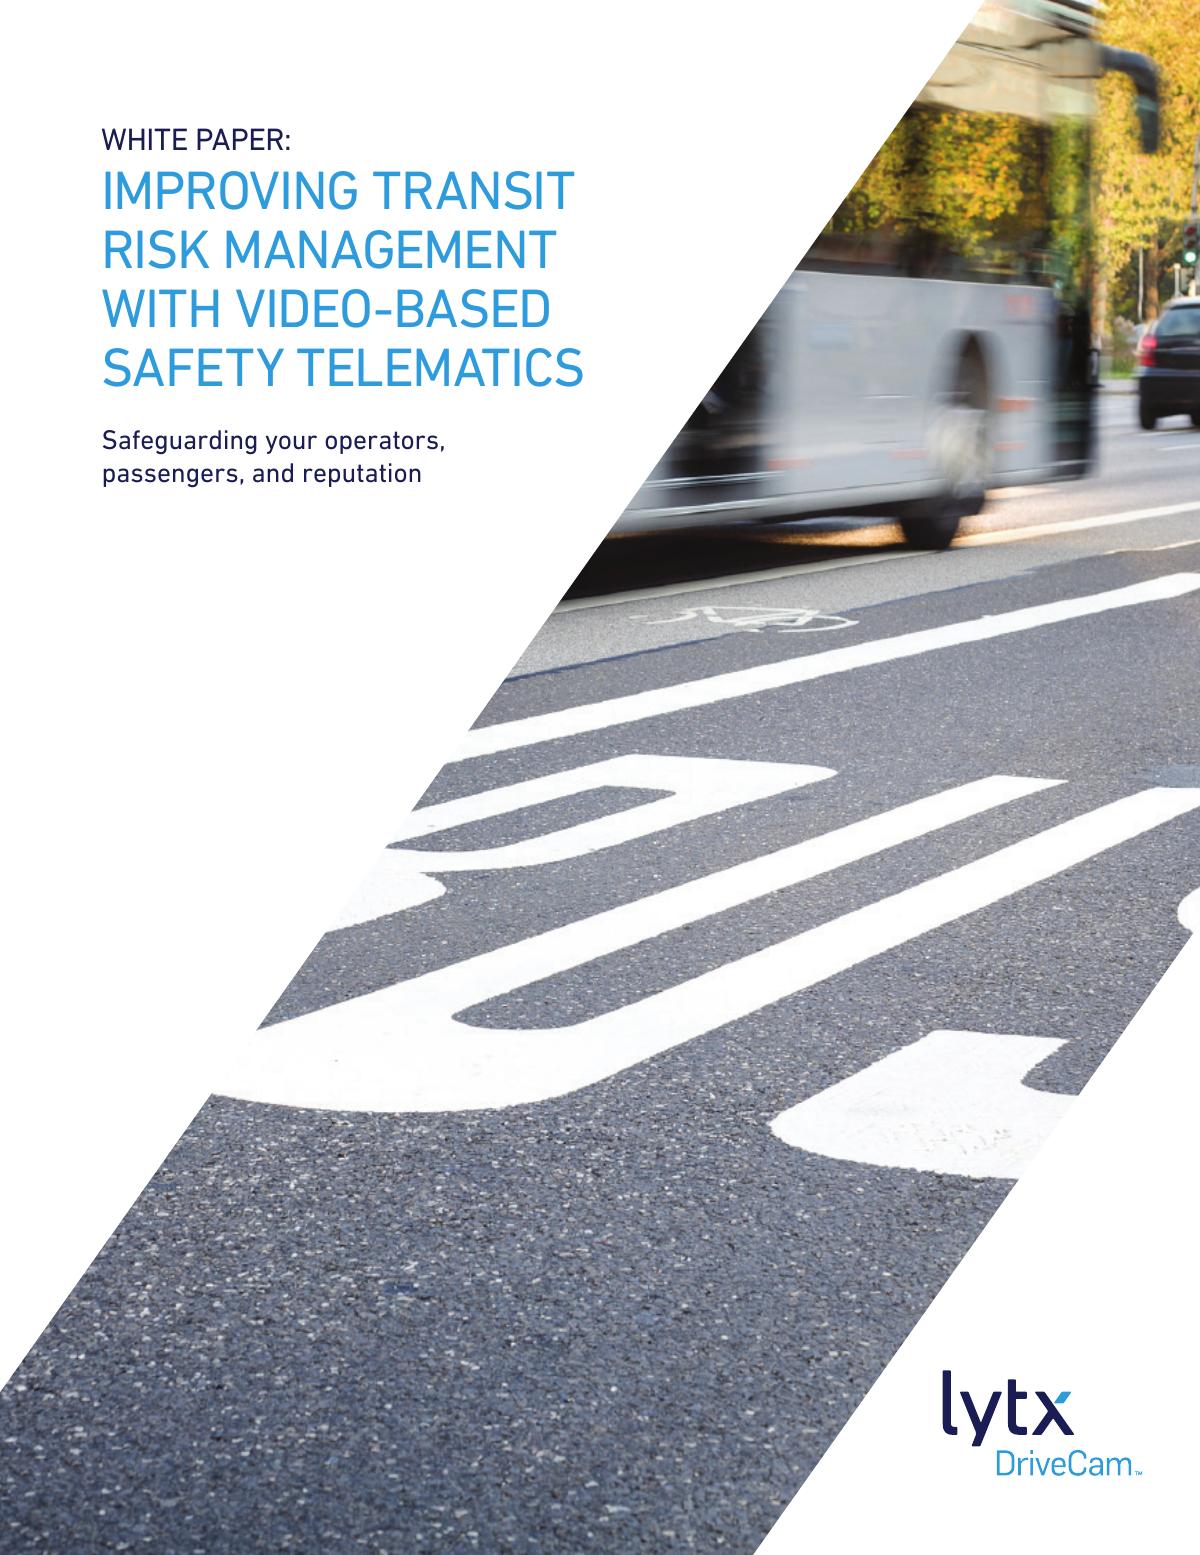 Improving Transit Risk Management With Video-Based Safety Telematics